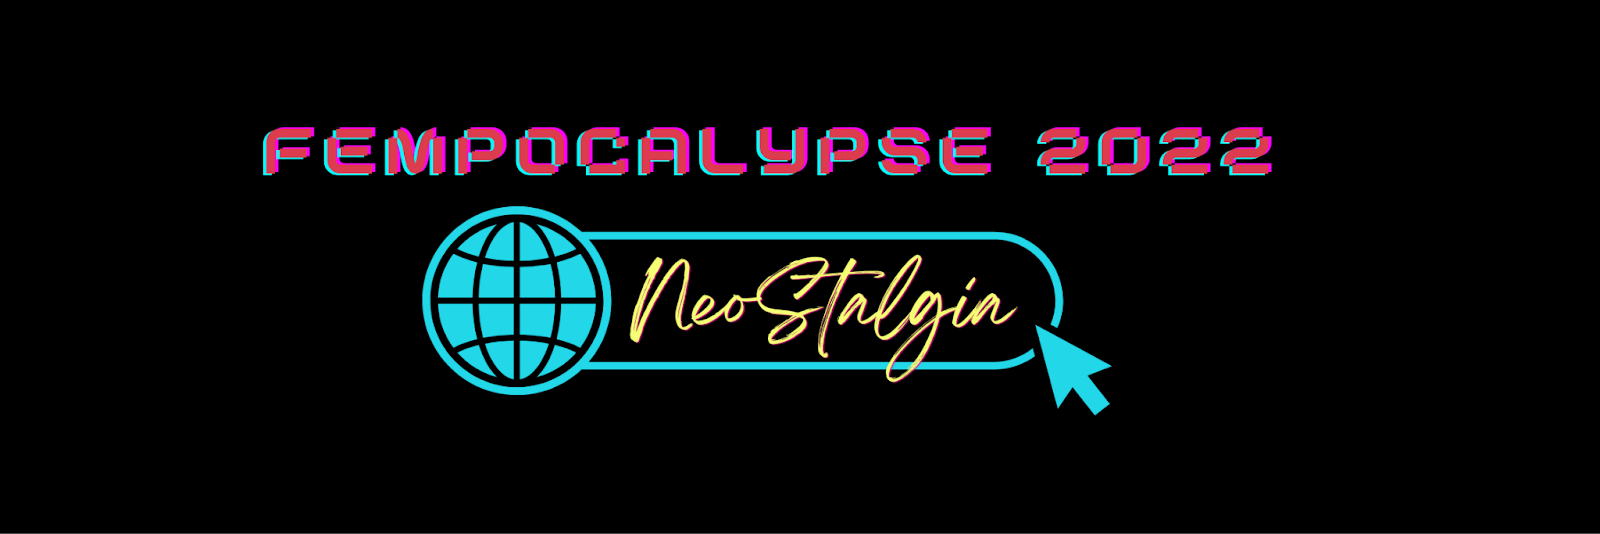 [Image Description: Pink retro computer text "Fempocalypse 2022" with a globe internet symbol in turquoise connected to a search bar with yellow cursive text "NeoStalgia" A turquoise cursor on the search bar. On a black background.]